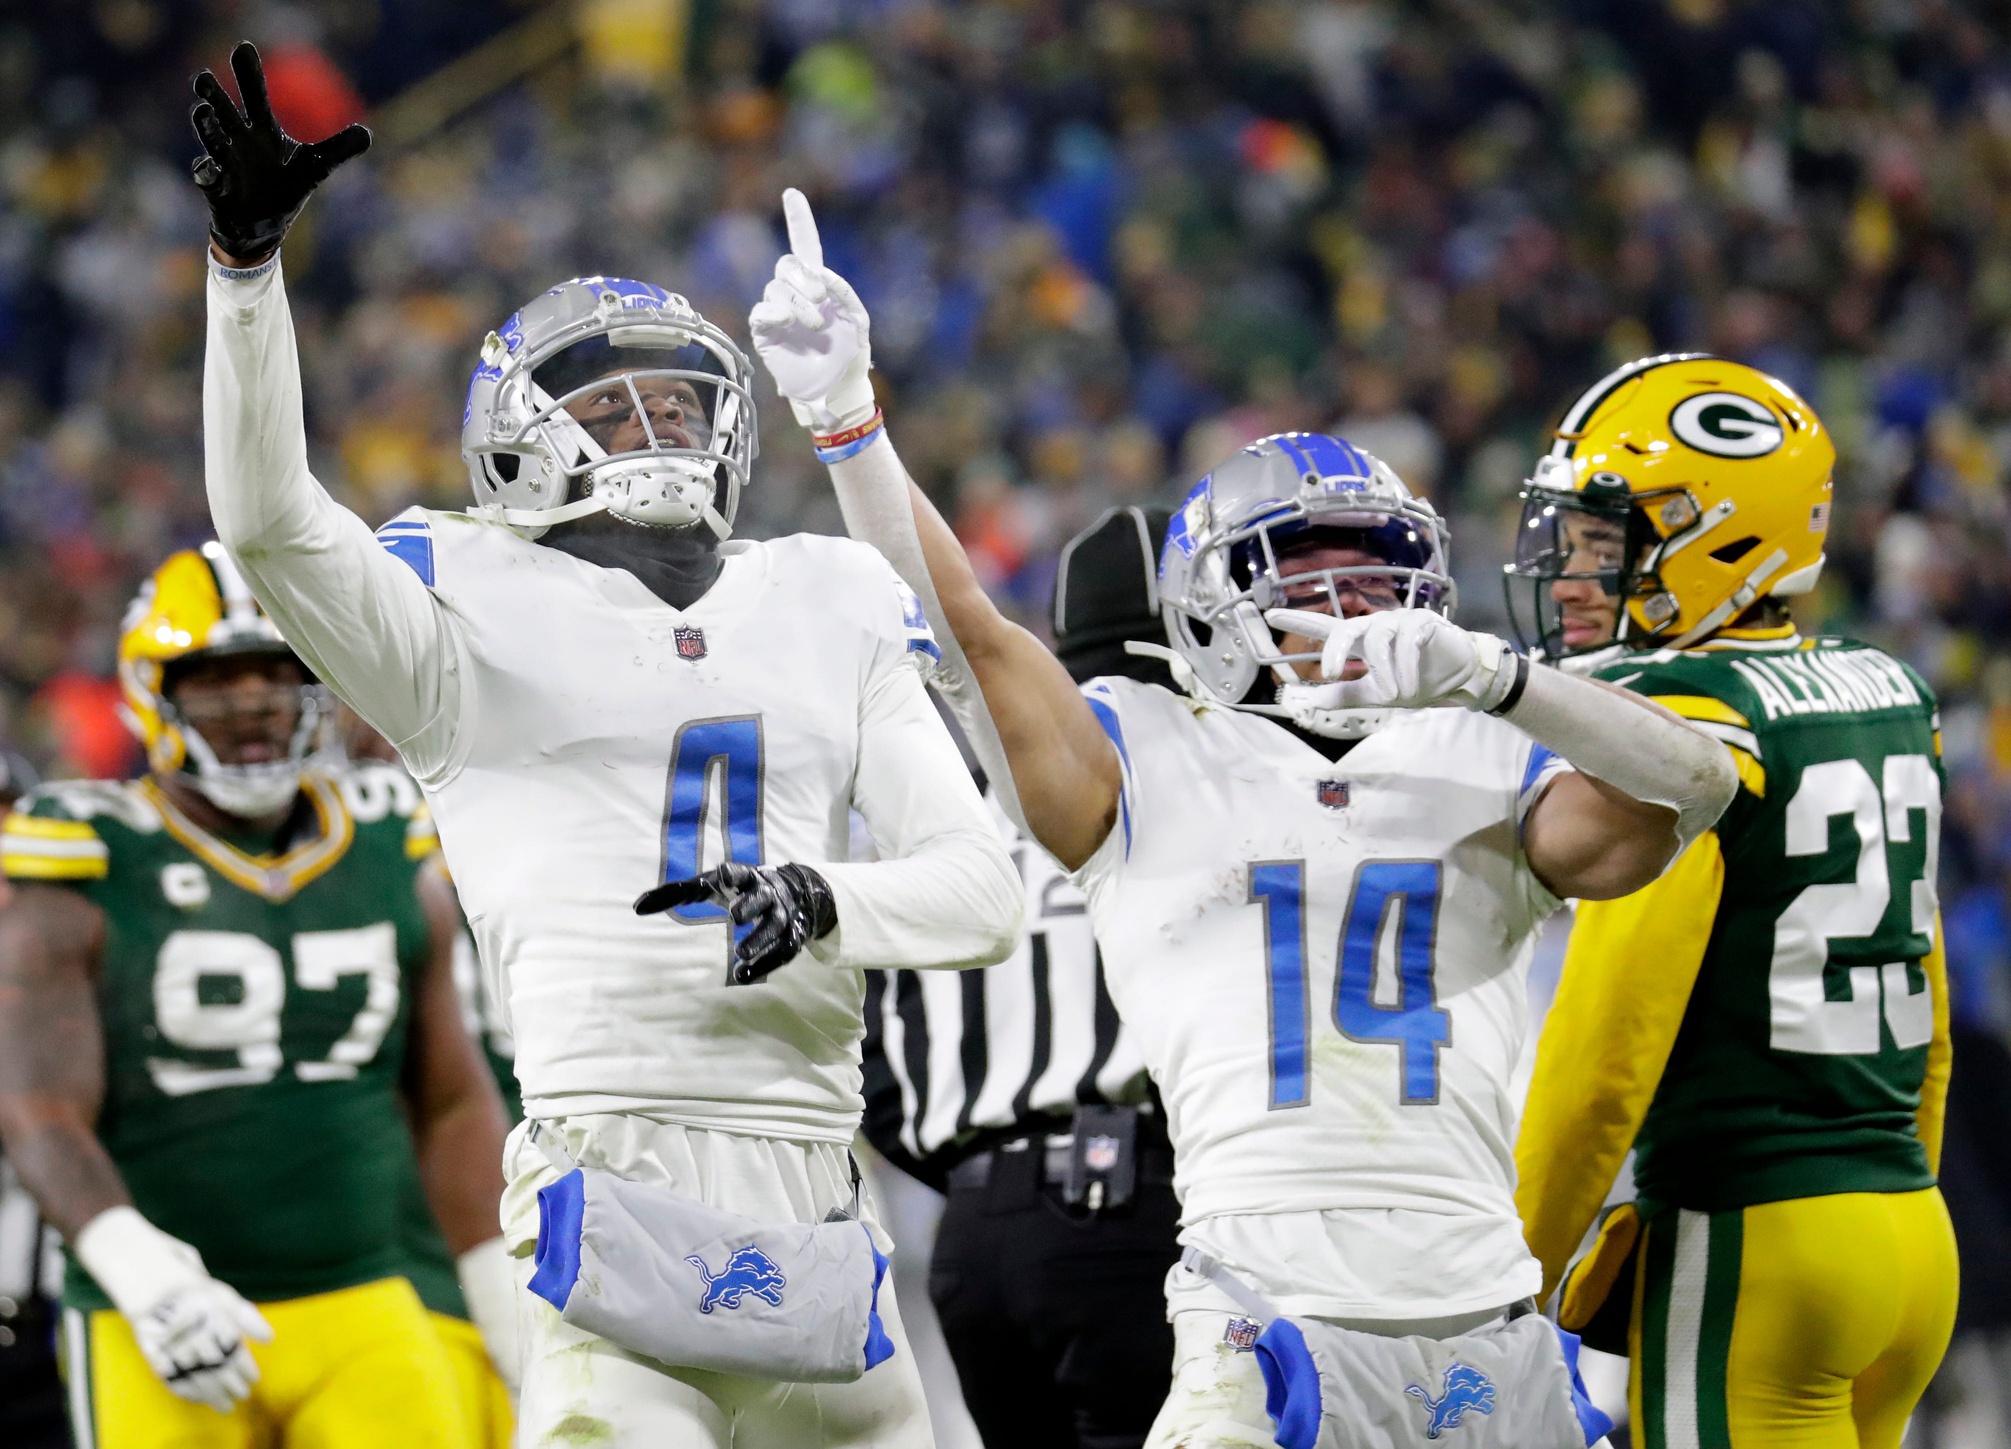 Lions spoil Packers season with 20-16 victory at Lambeau Field